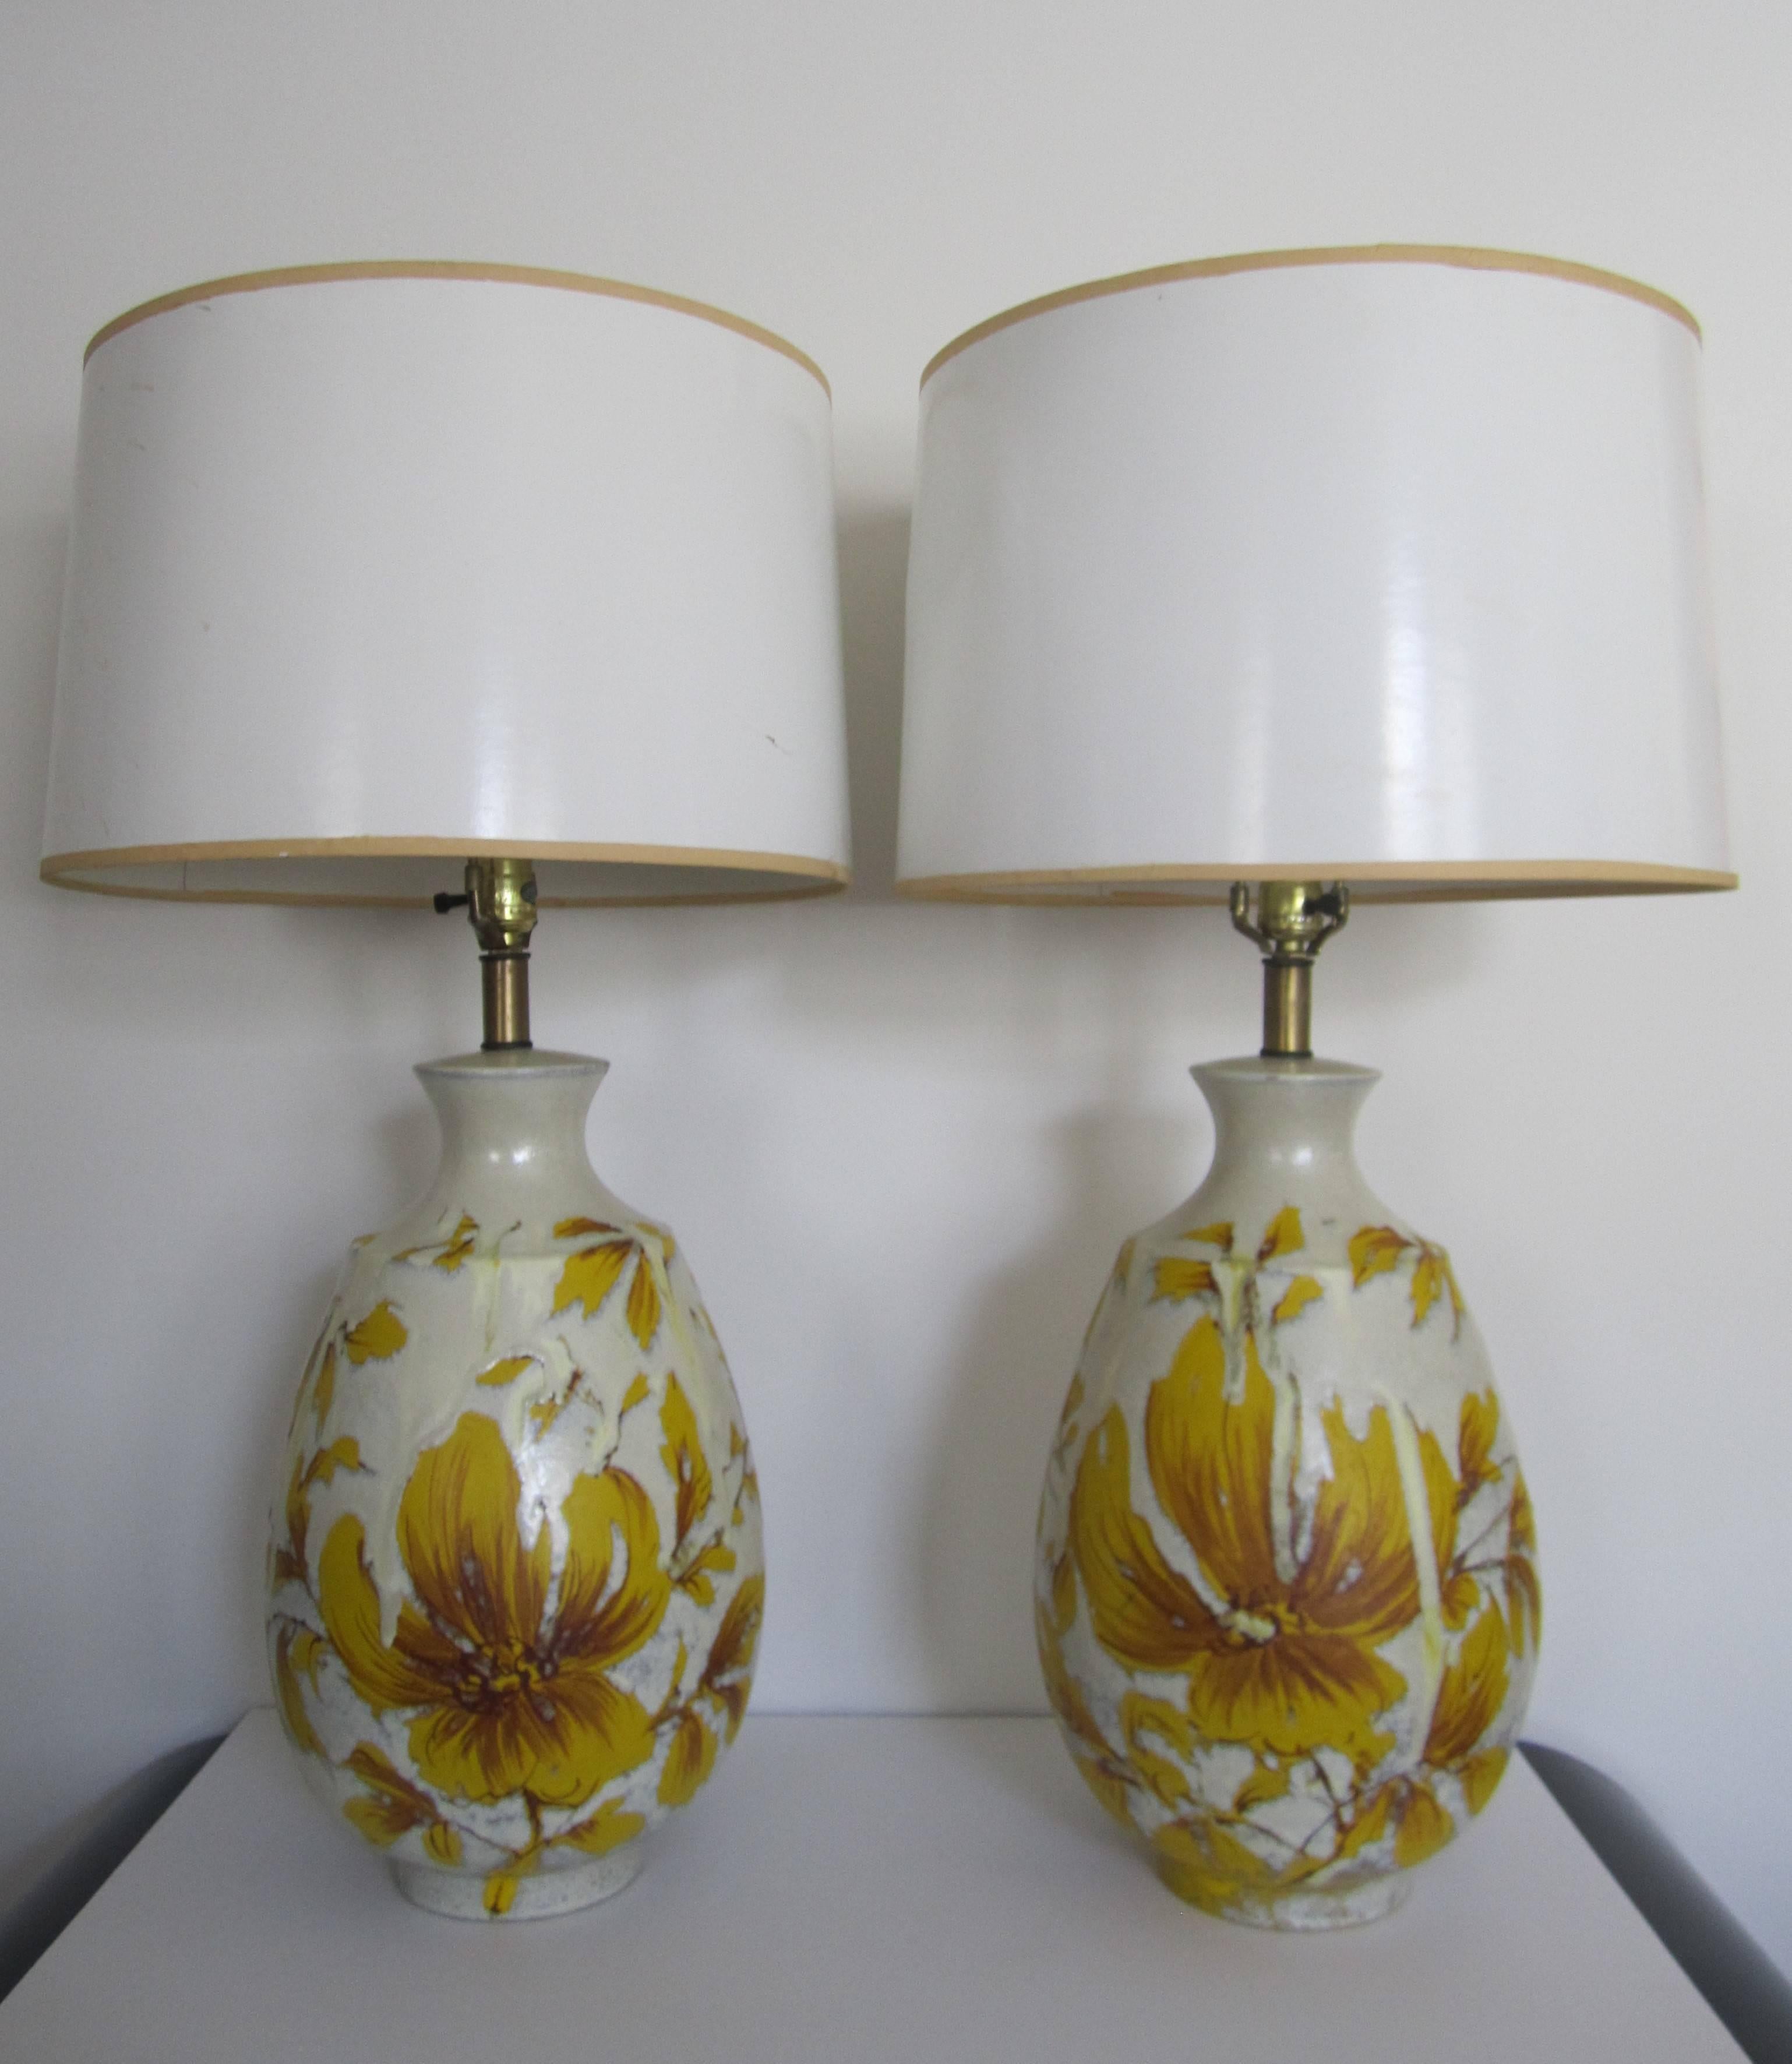 American Yellow and White Terracotta Pottery Table Lamps with Flowers, Pair, 1960s